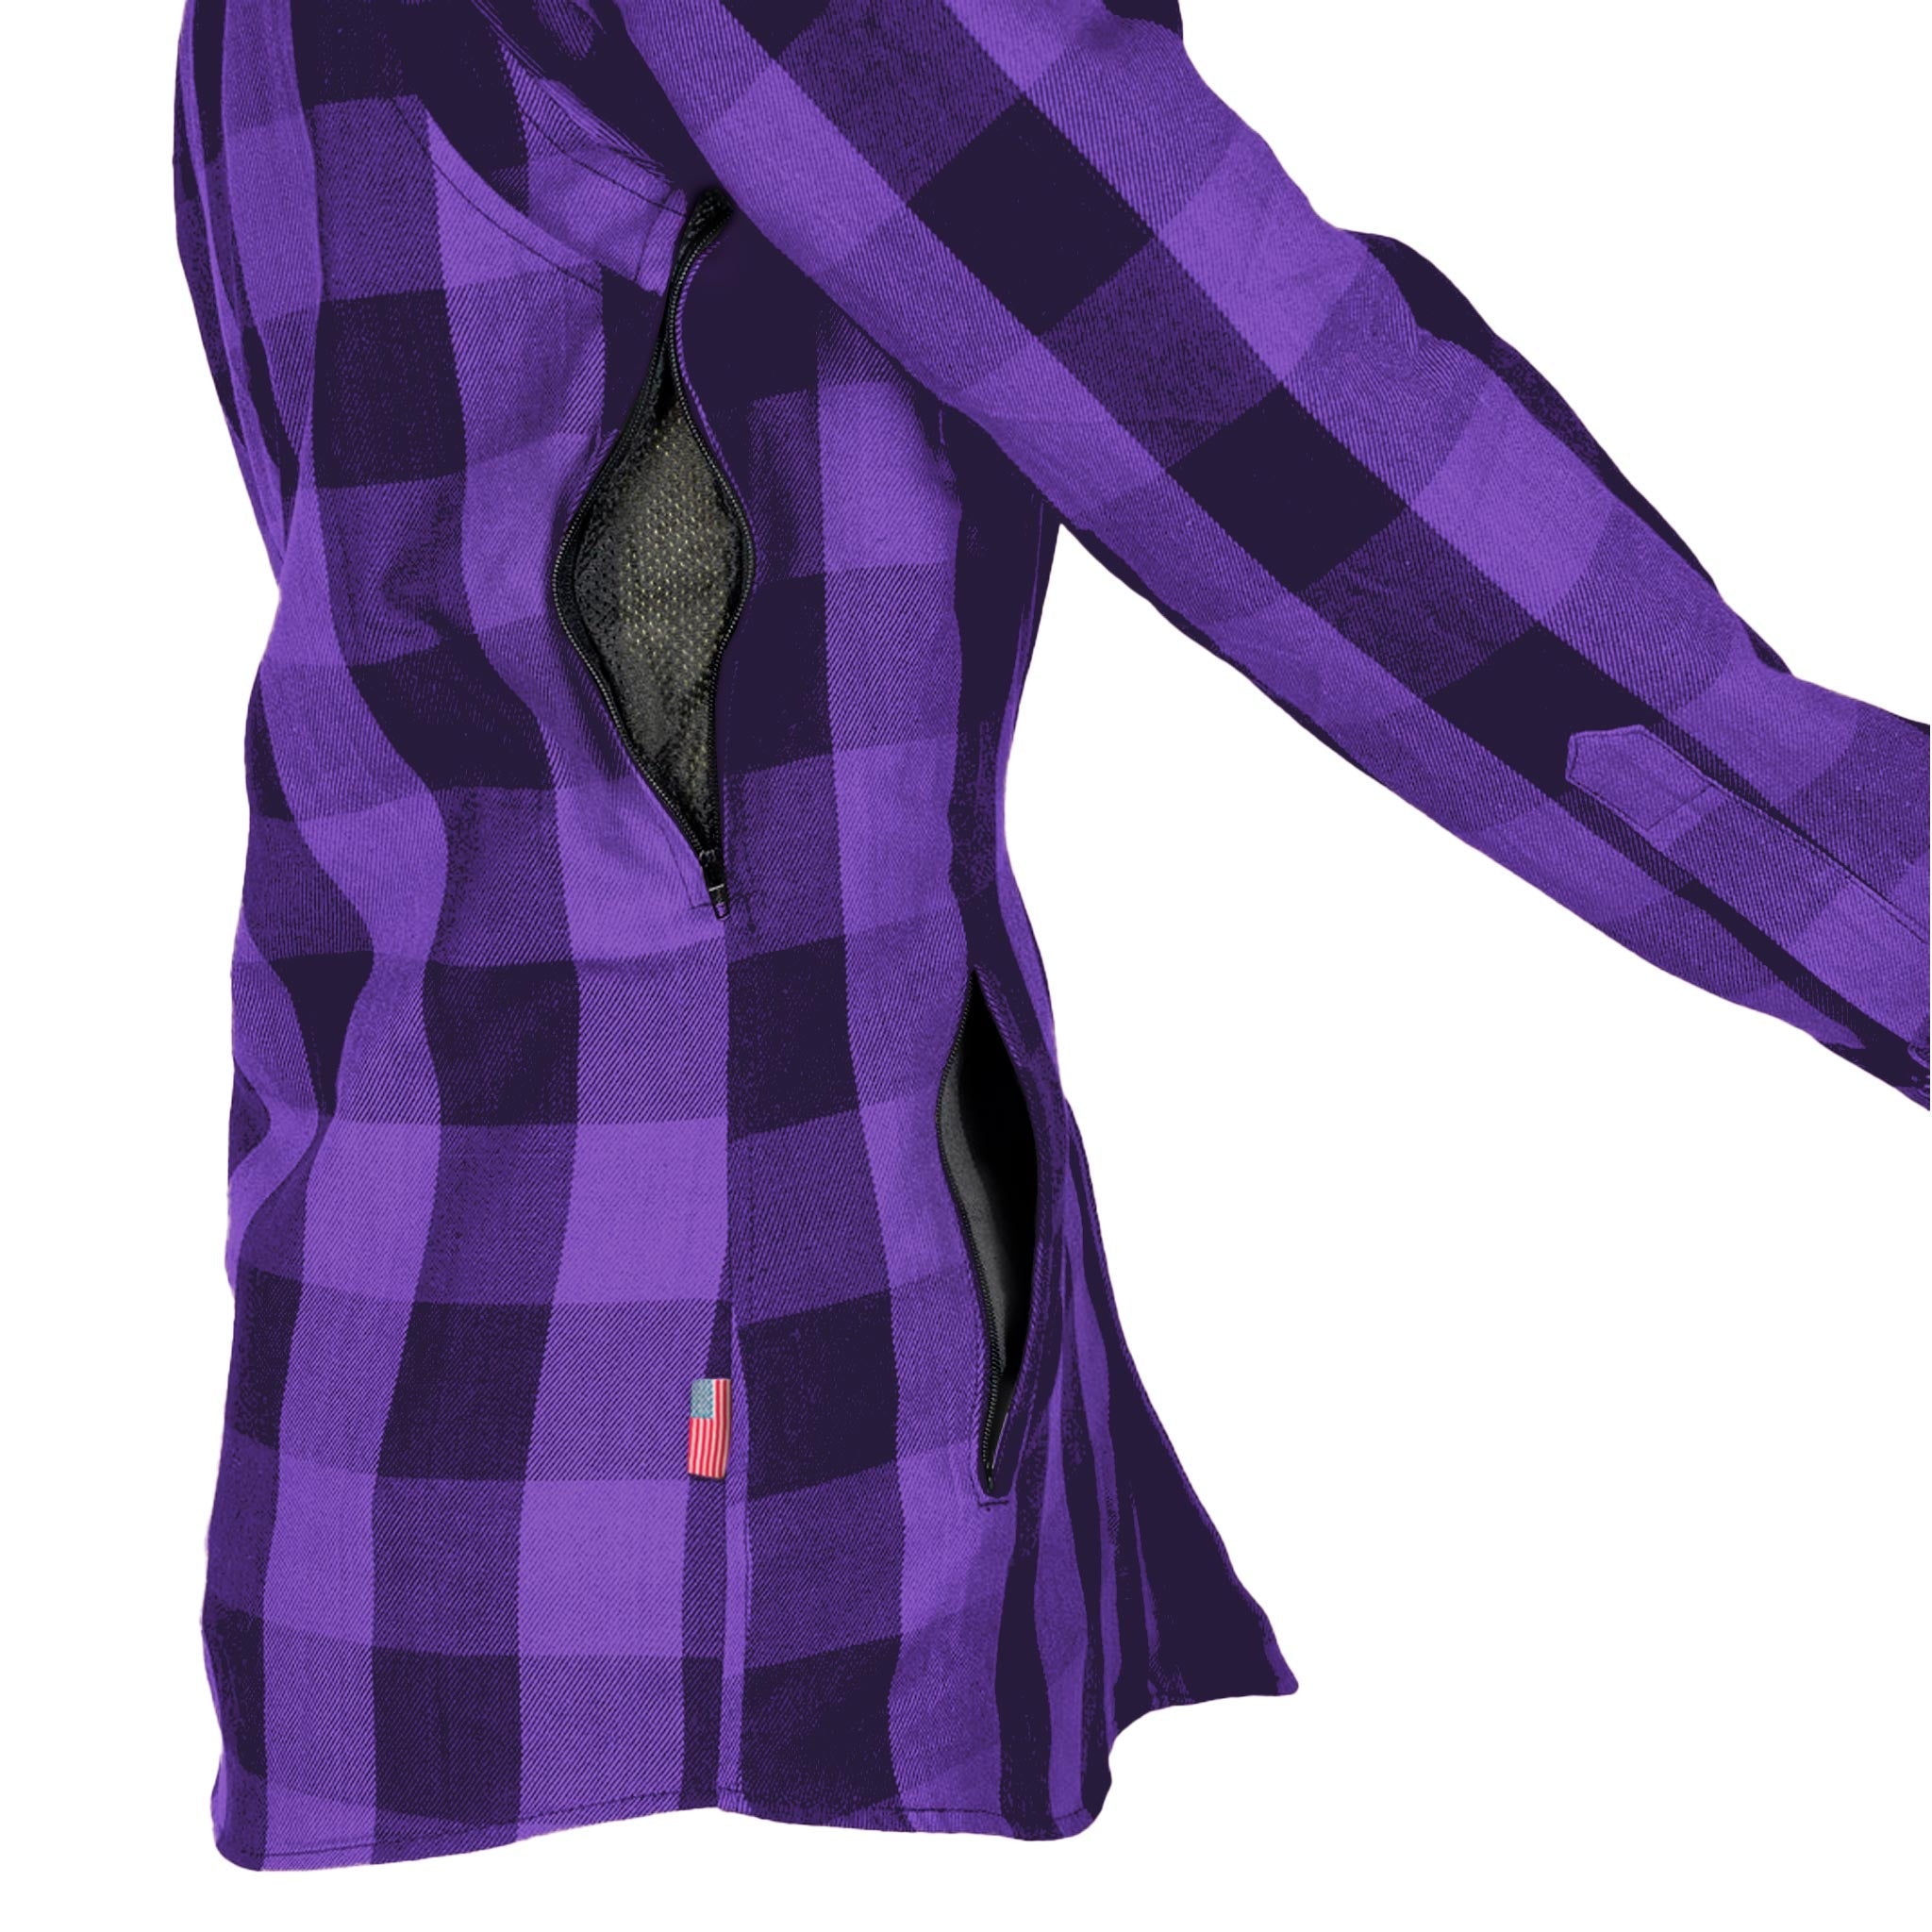 Protective Flannel Shirt for Women - Purple Checkered